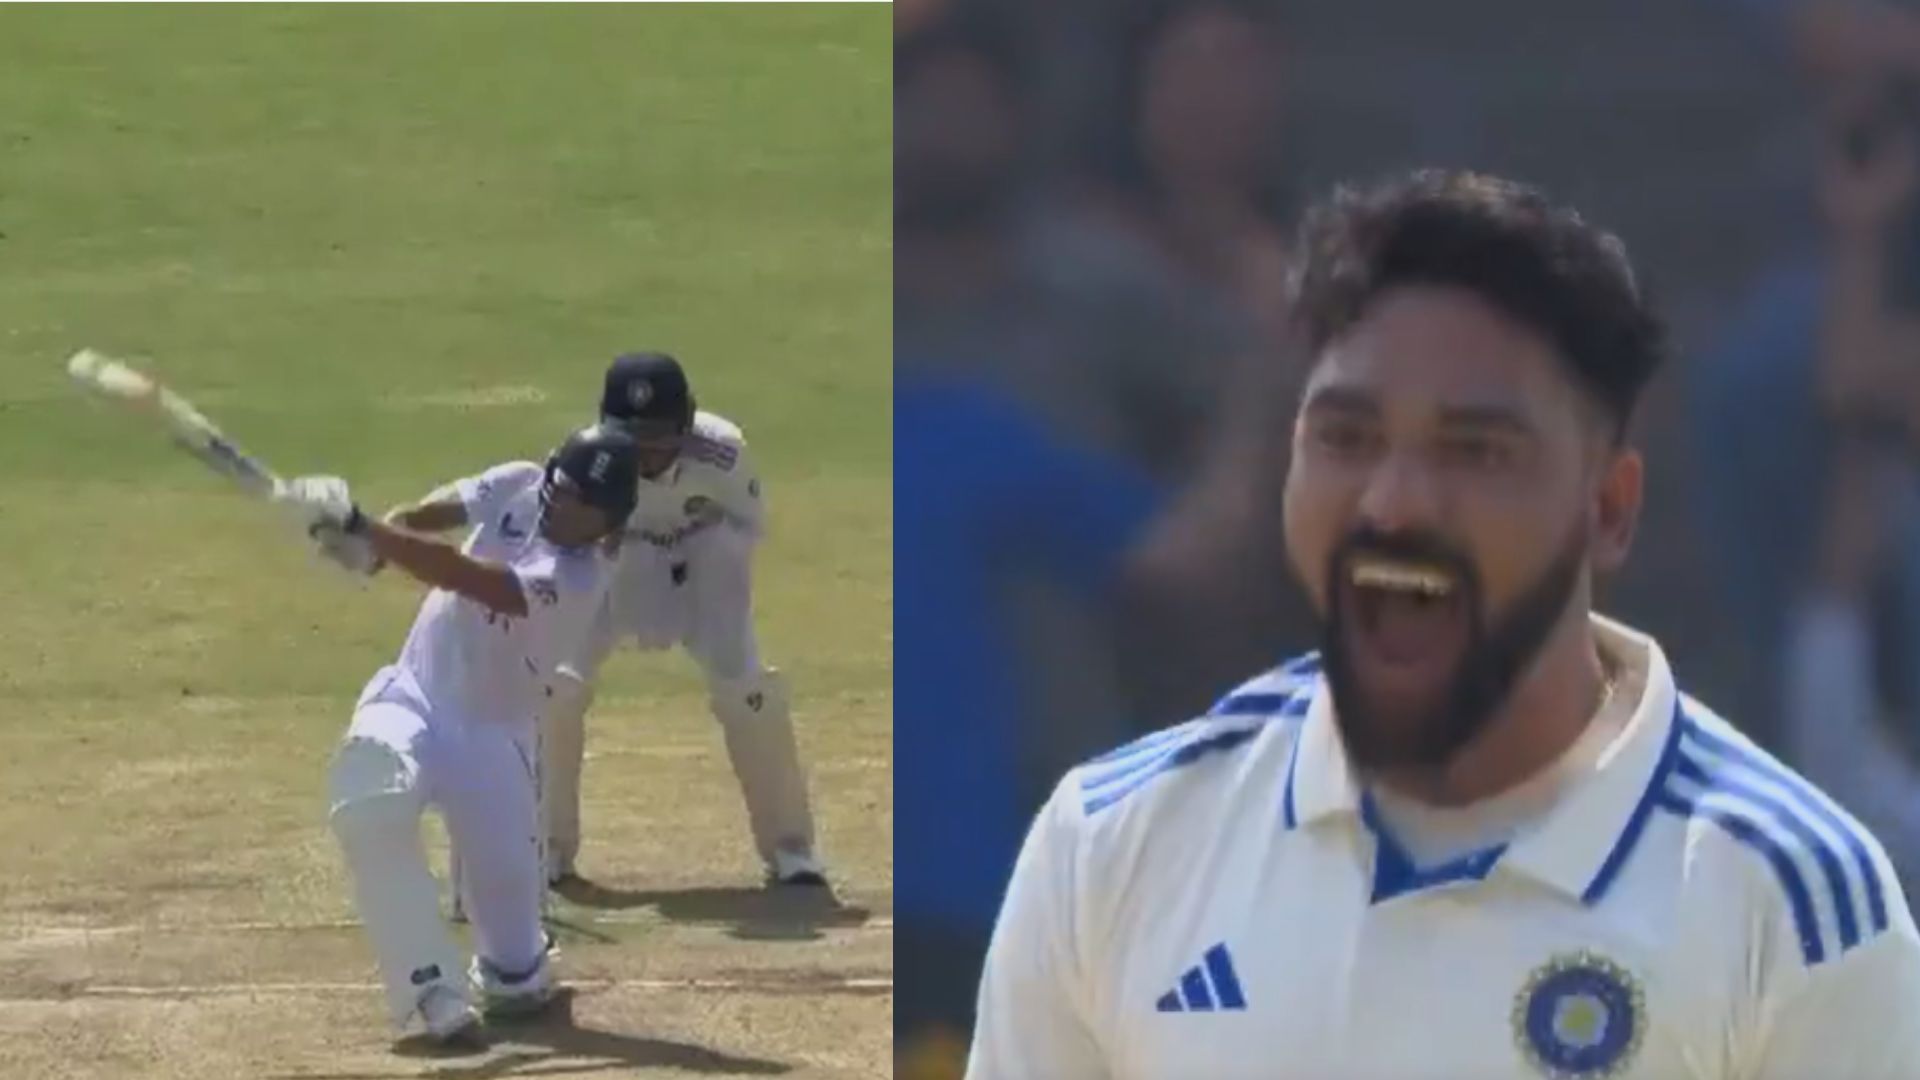 Snippets from the wickets of Ben Stokes and Ben Foakes on back-to-back deliveries